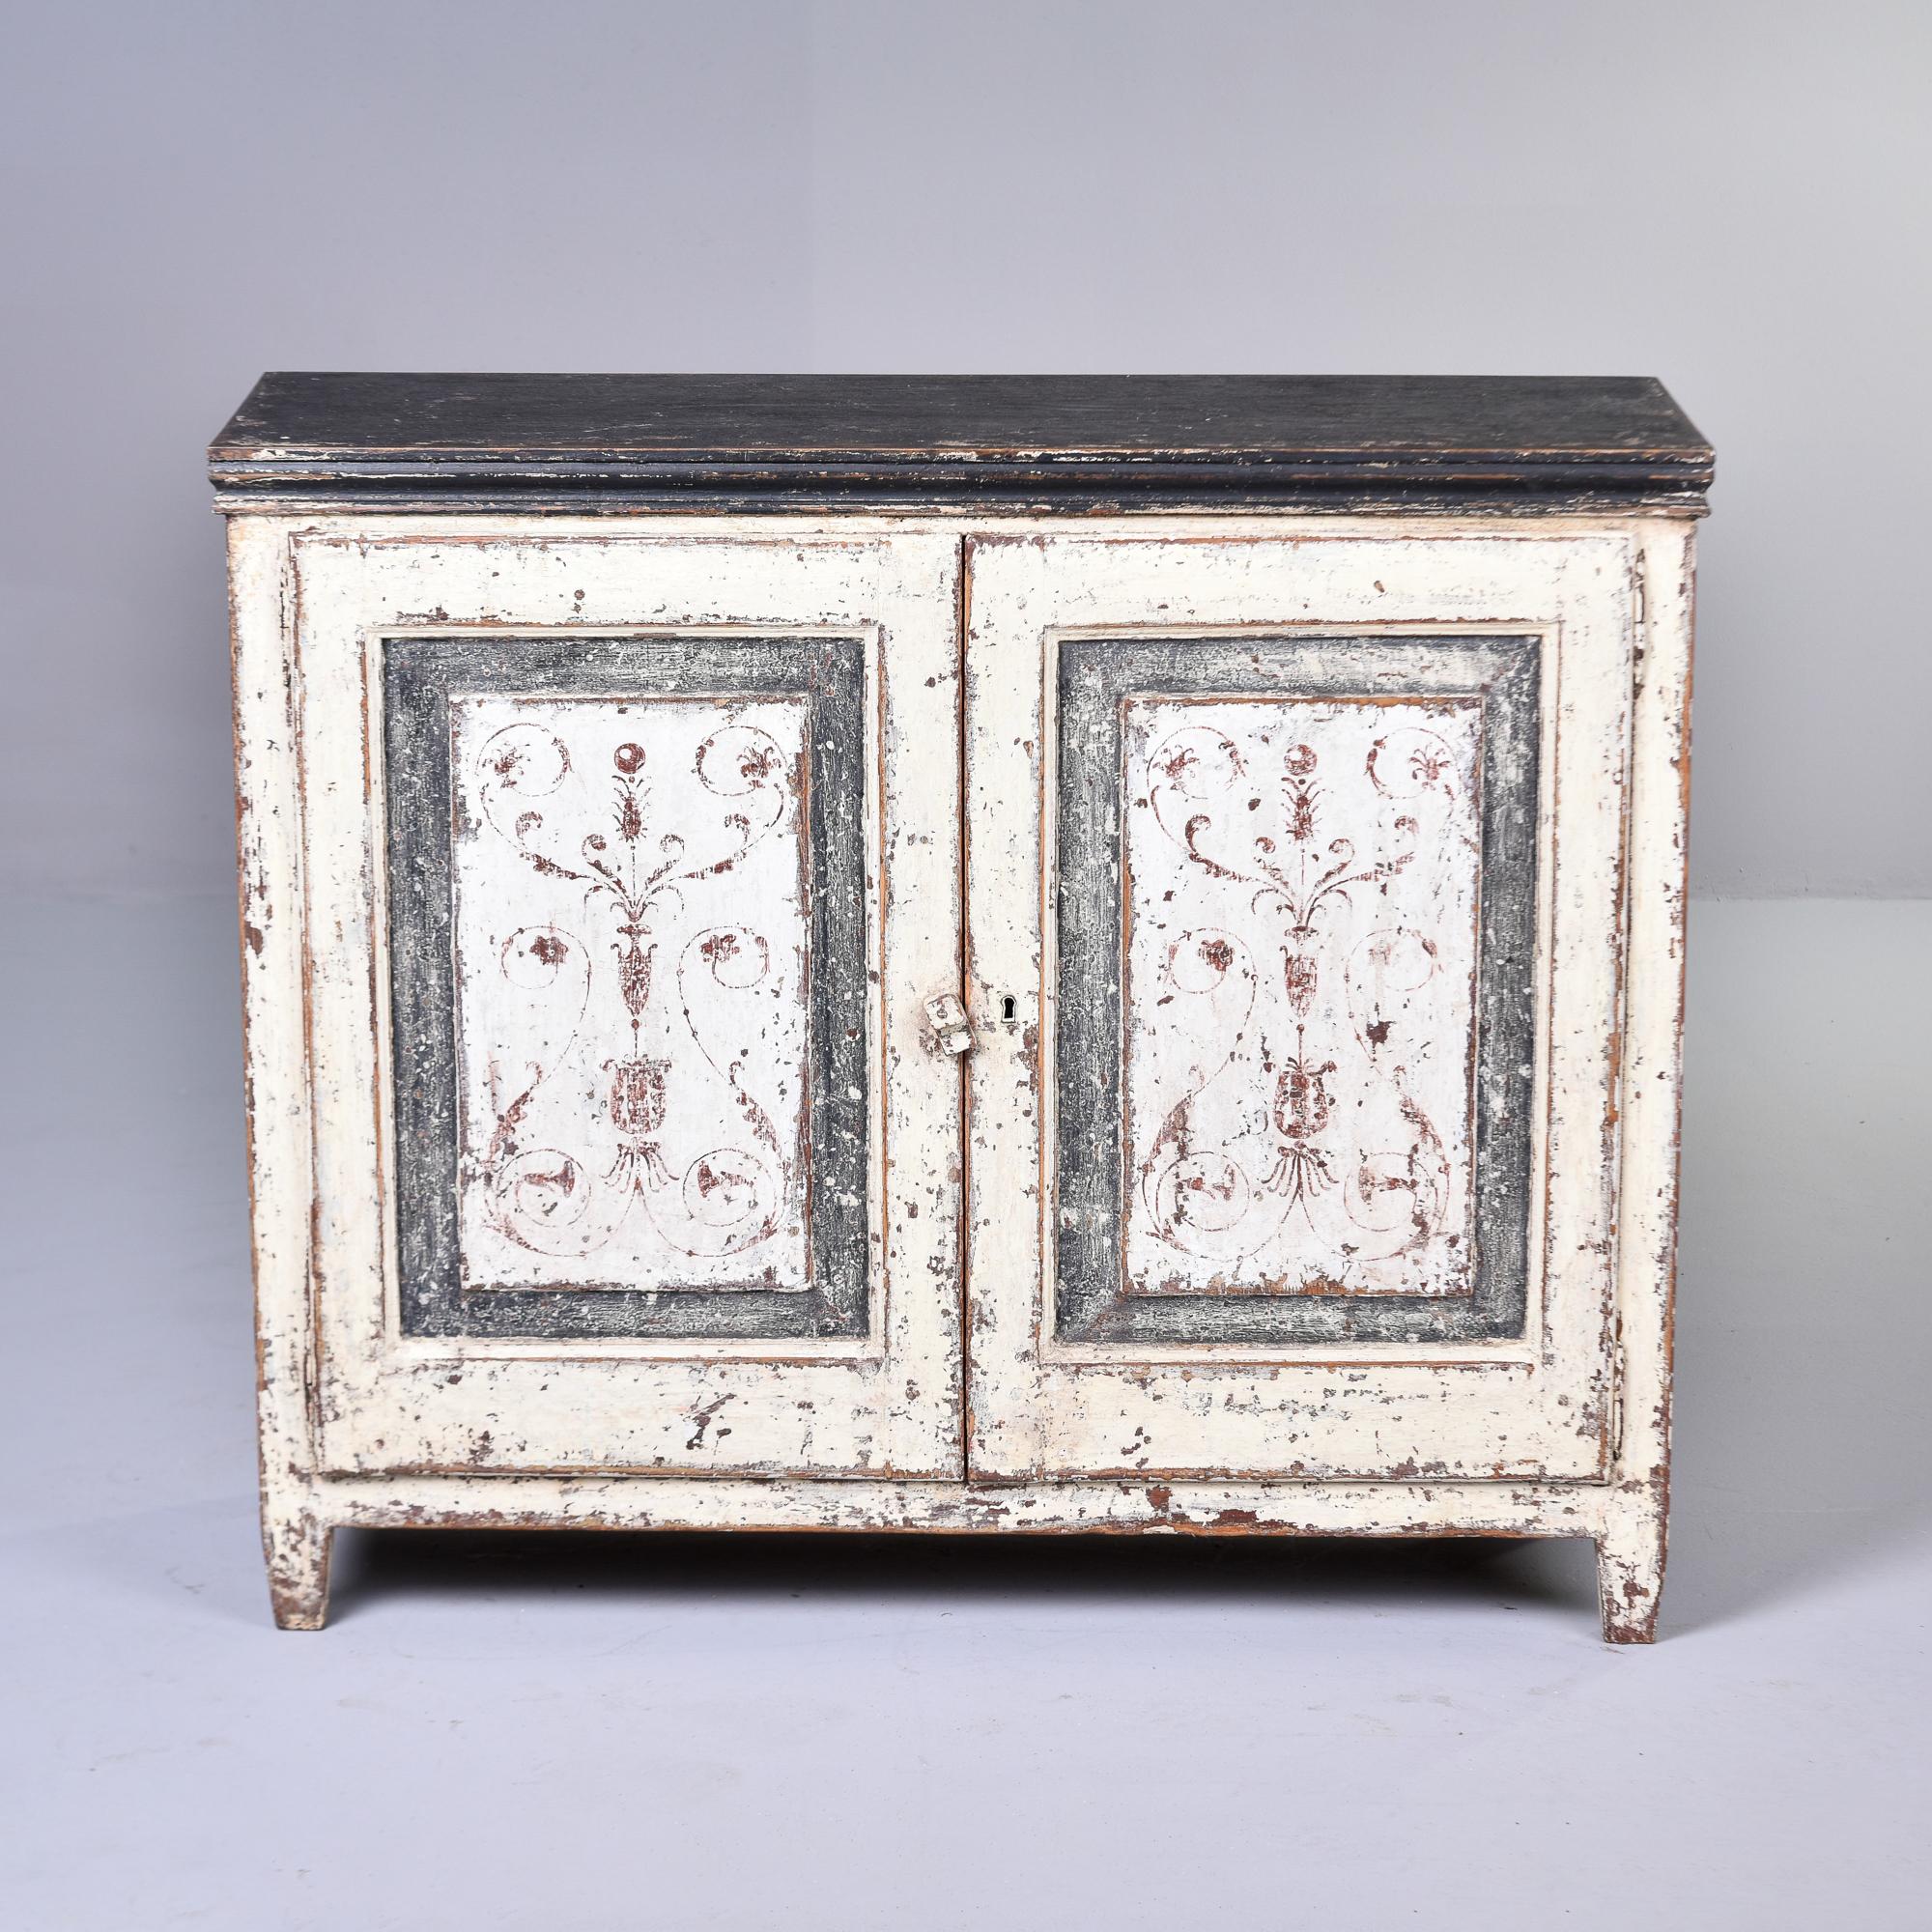 Found in England, this two door painted wood cabinet dates from the 1930s. Painted finish features a slate gray colored top with antique white on the sides and fronts. Door fronts have a contrasting gray border and white centers with decorative